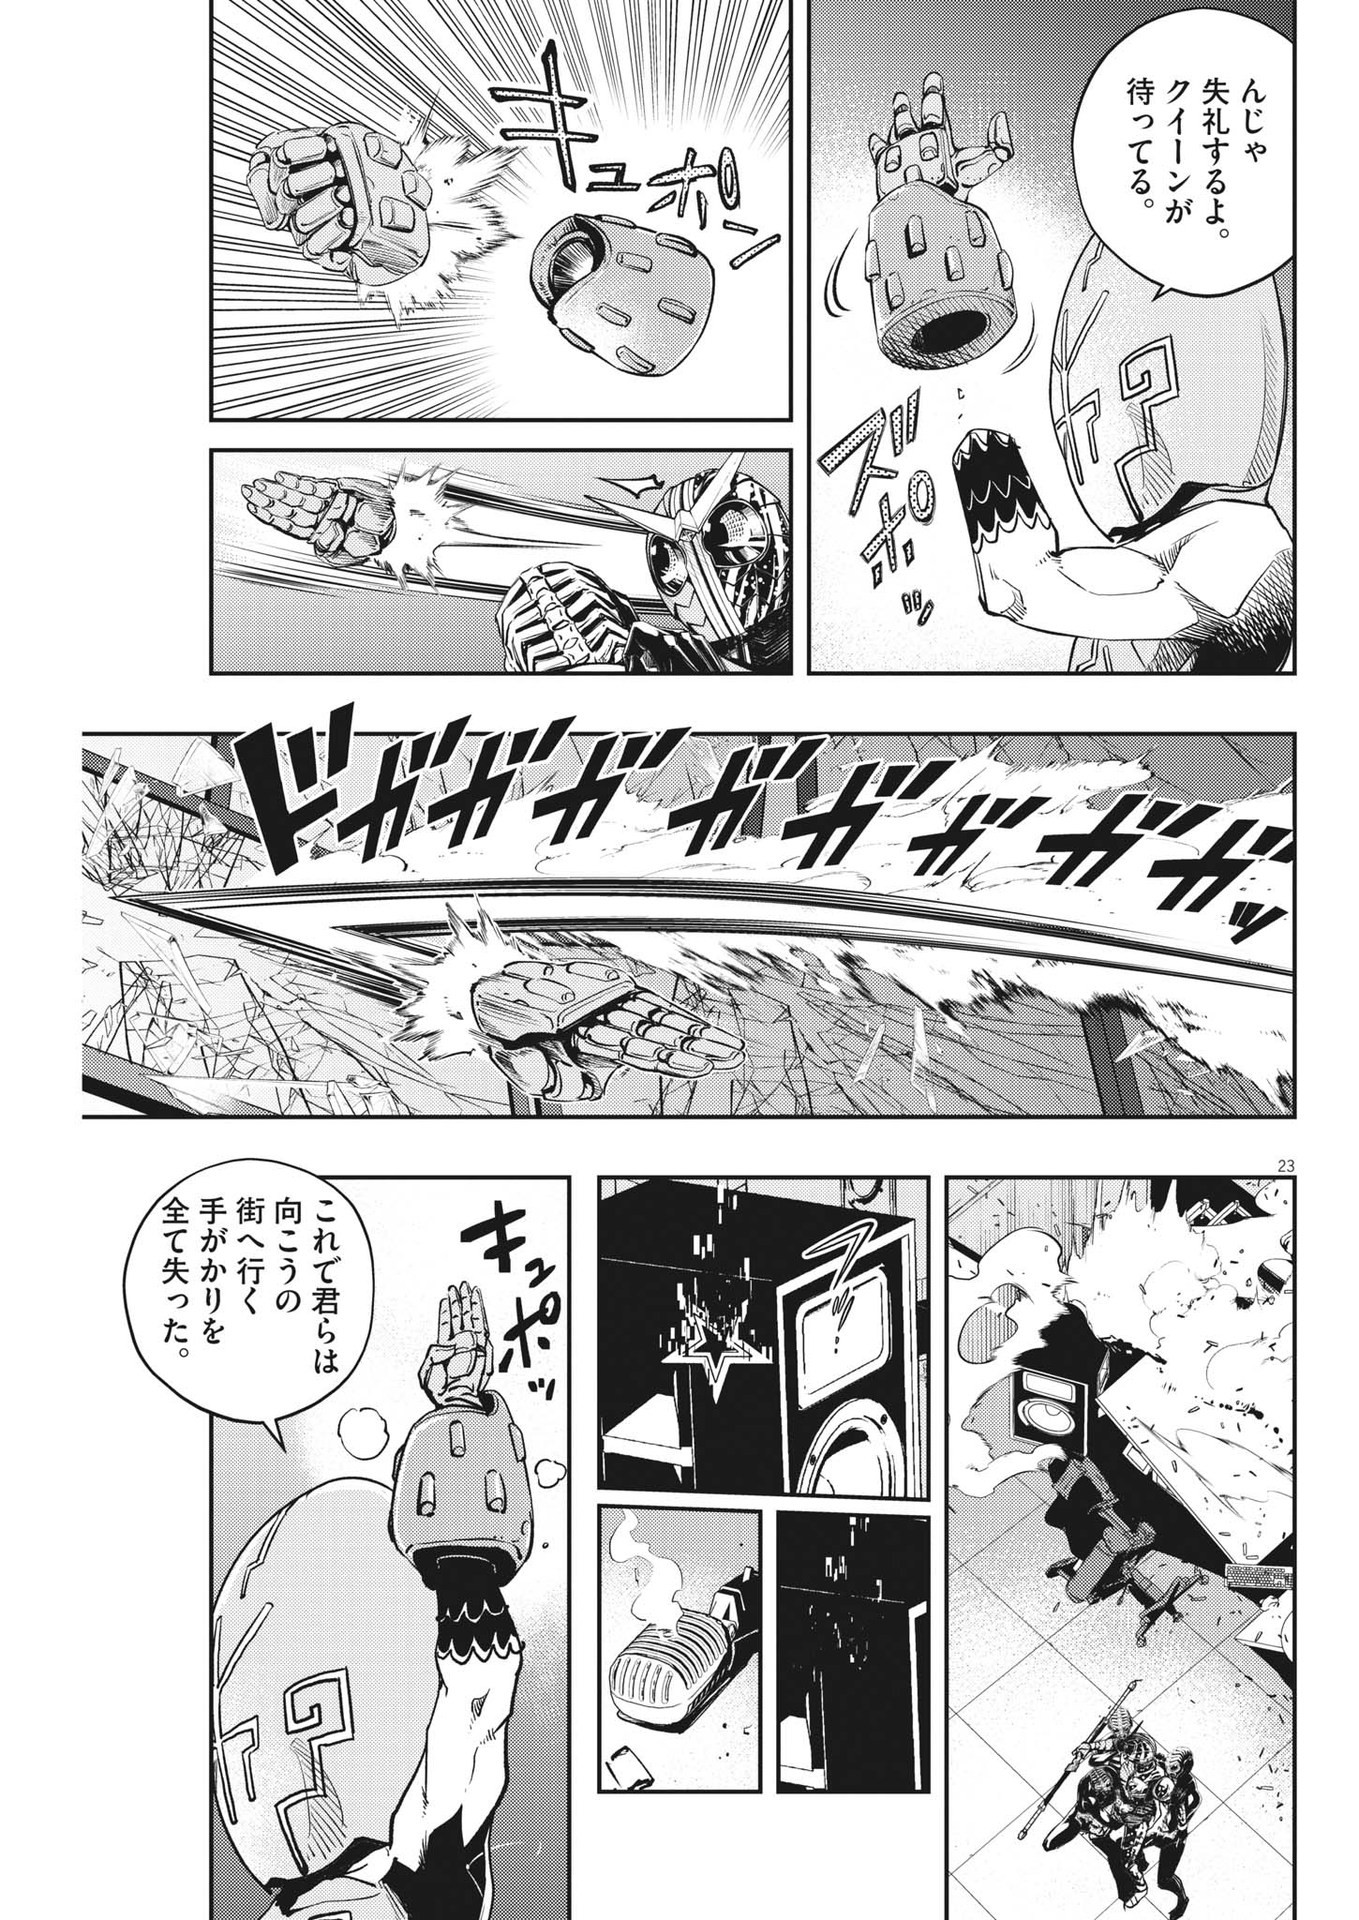 Kamen Rider W: Fuuto Tantei - Chapter 140 - Page 23